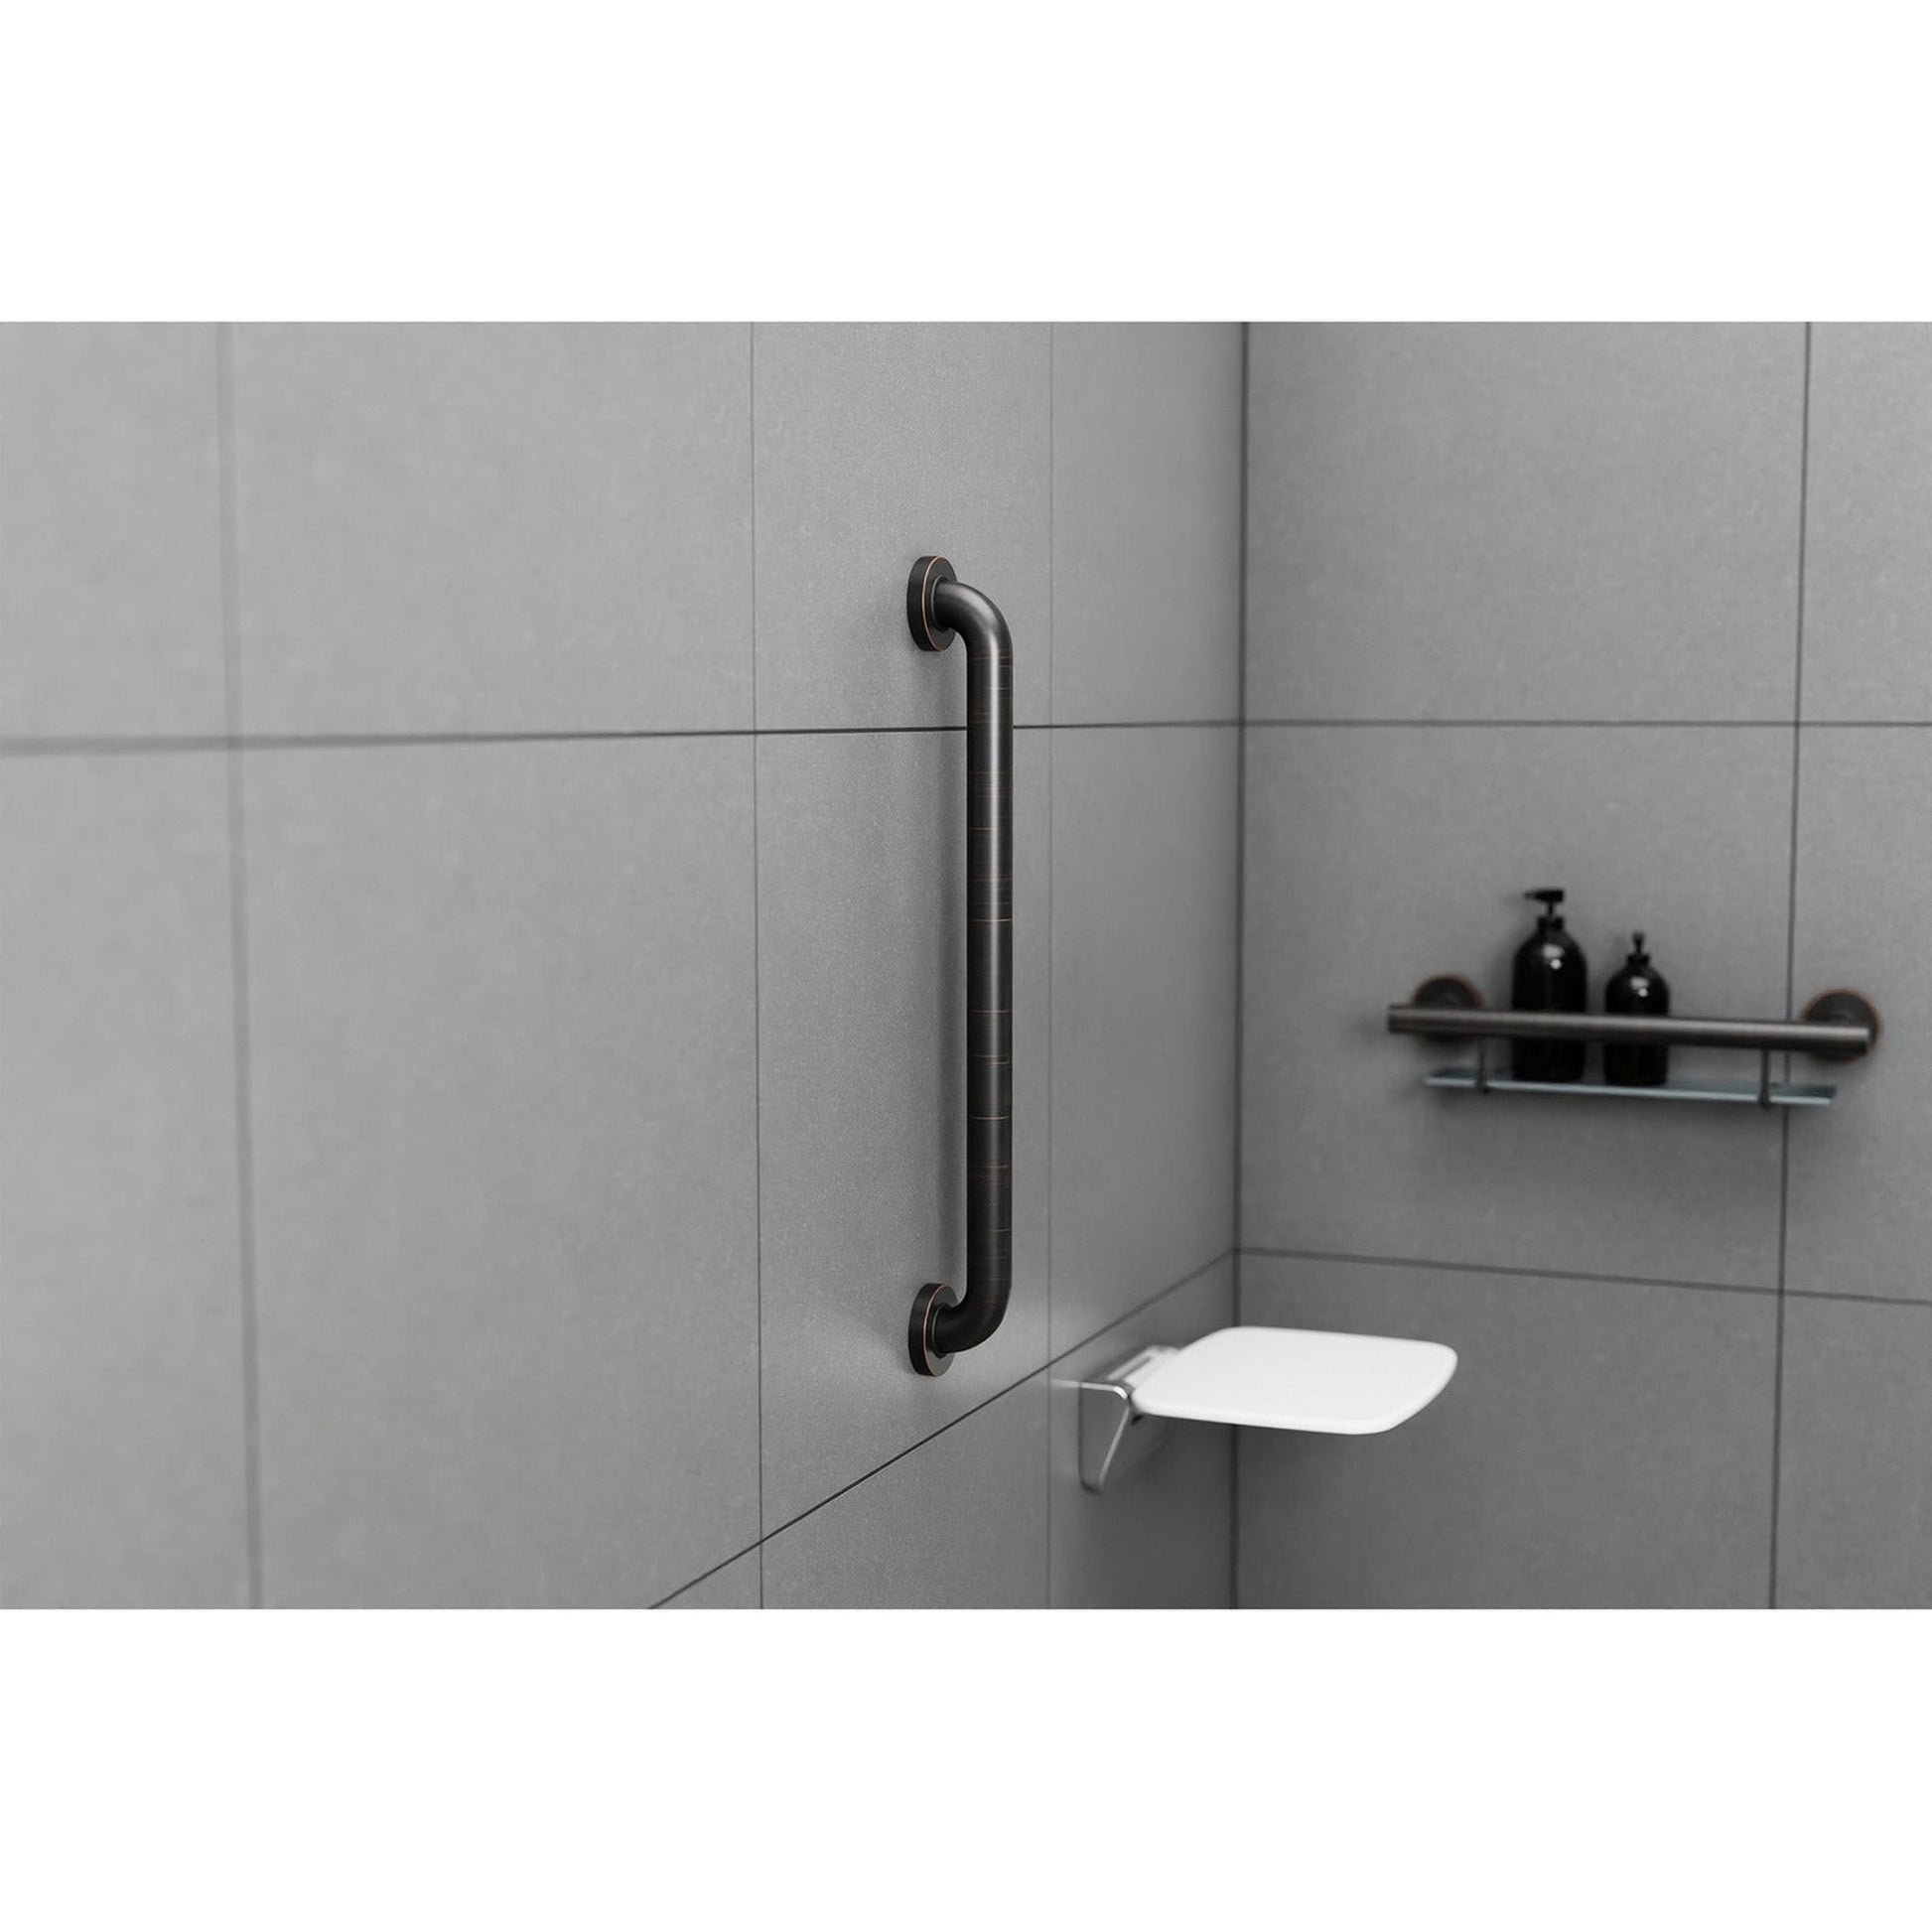 Evekare 24" x 1.5" Stainless Steel Concealed Mount Grab Bar in Oil Rubbed Bronze